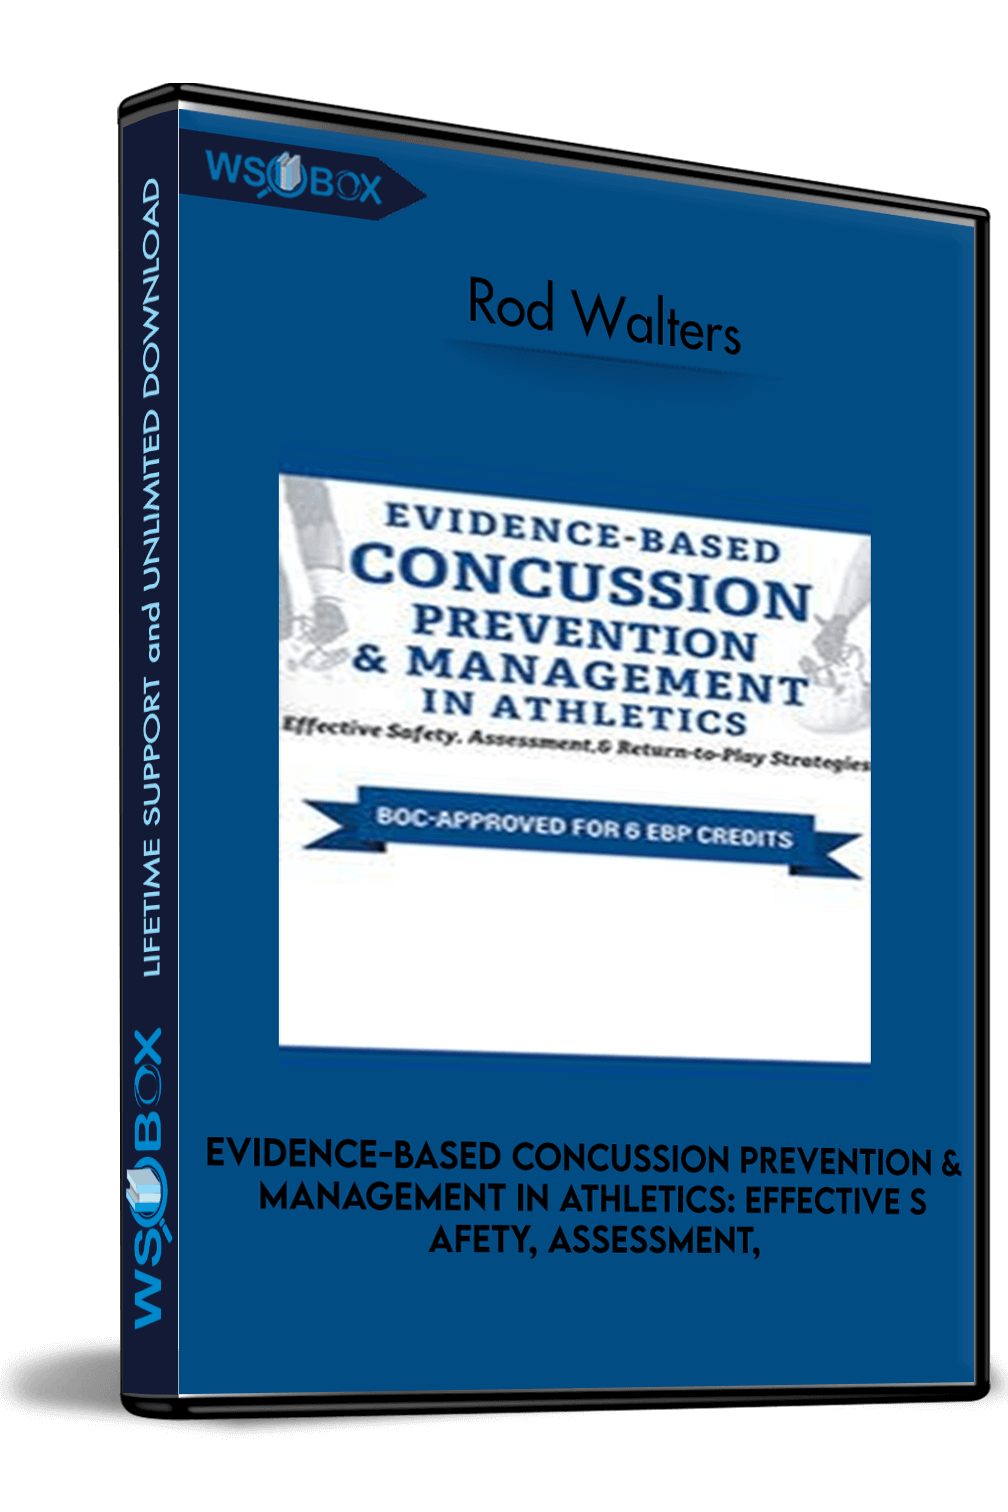 evidence-based-concussion-prevention-management-in-athletics-effective-safety-assessment-return-to-play-strategies-rod-walters